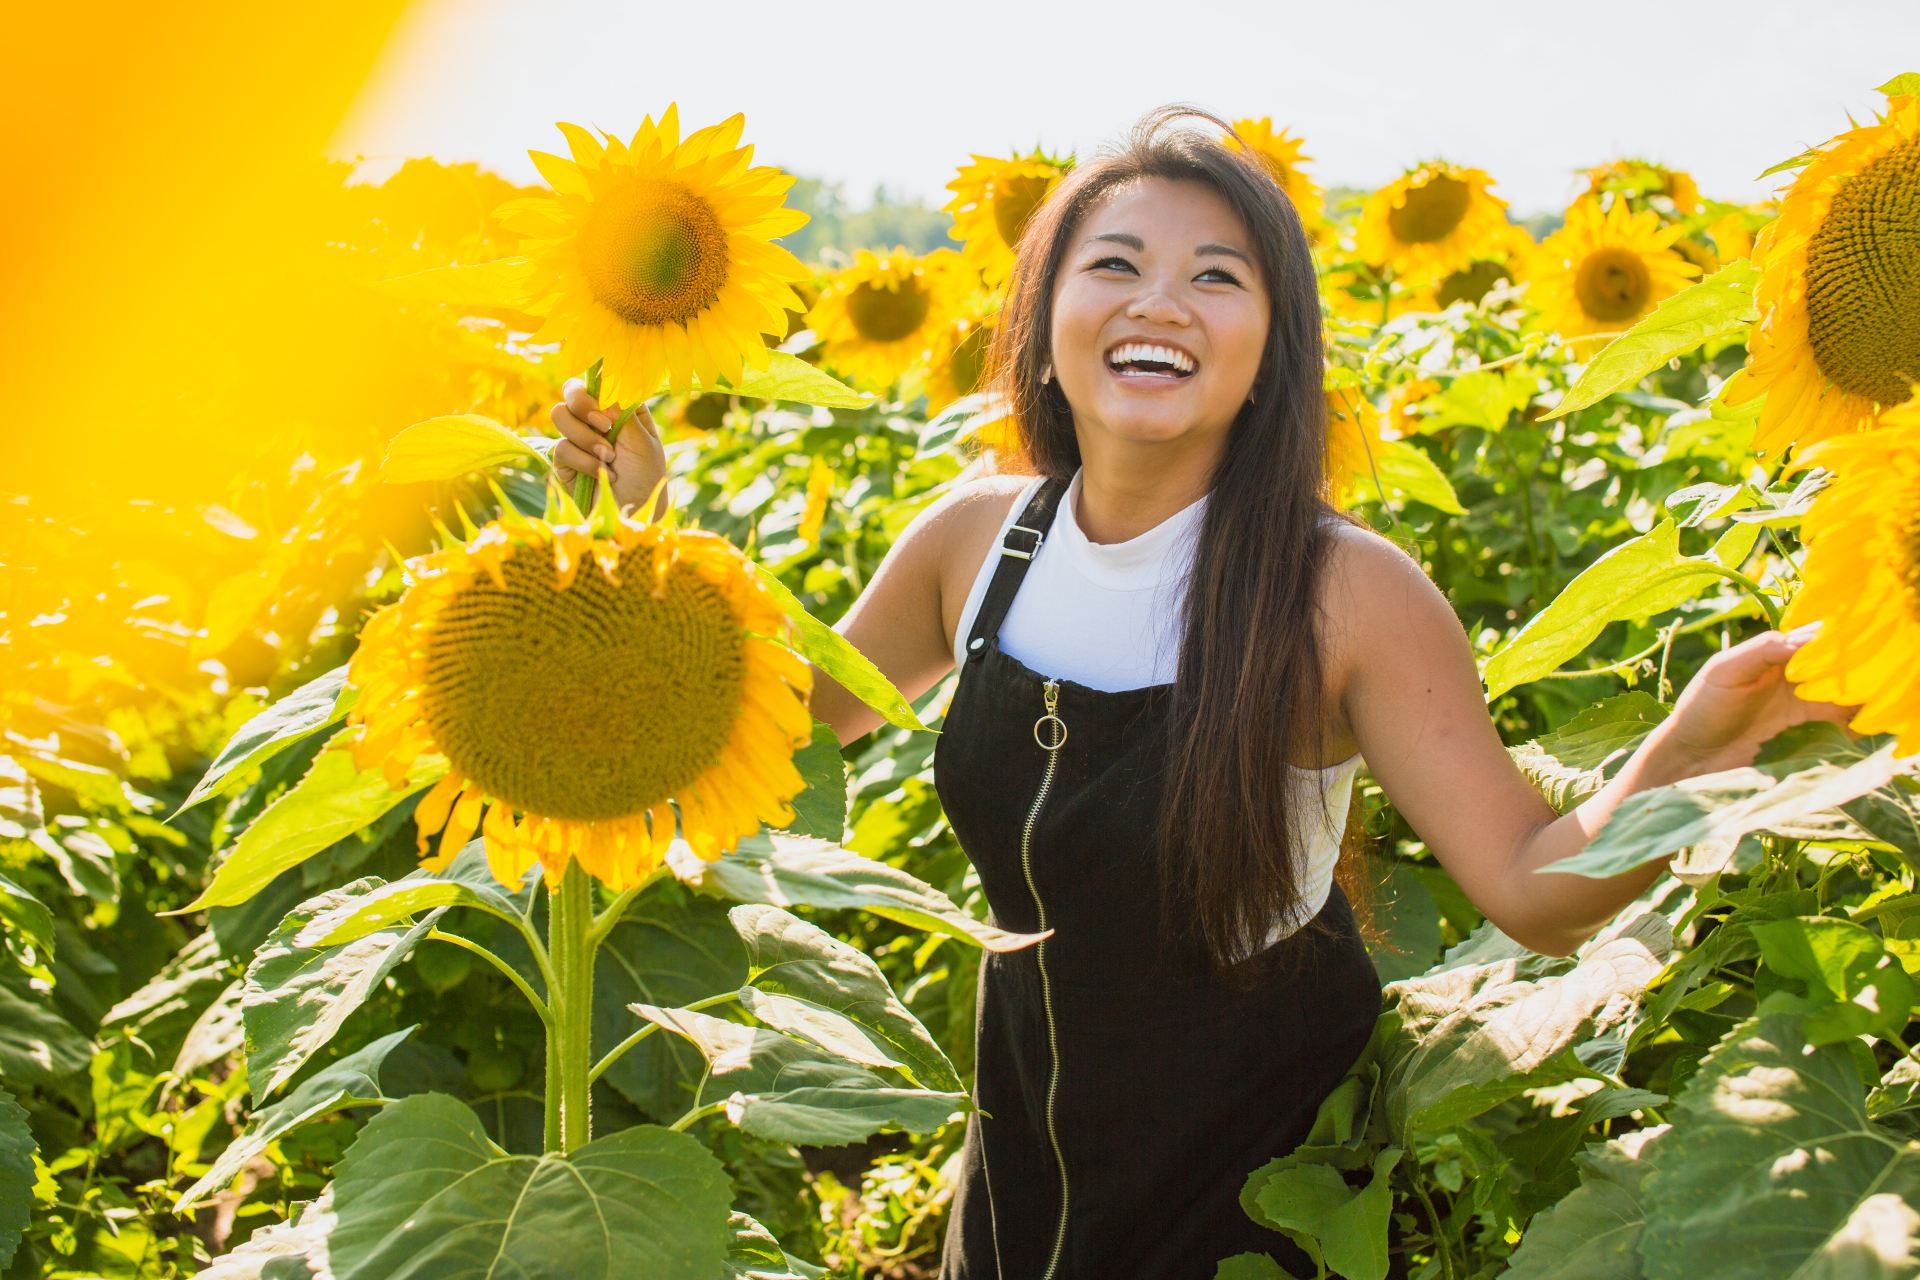 woman surrounded with sunflowers at daytime